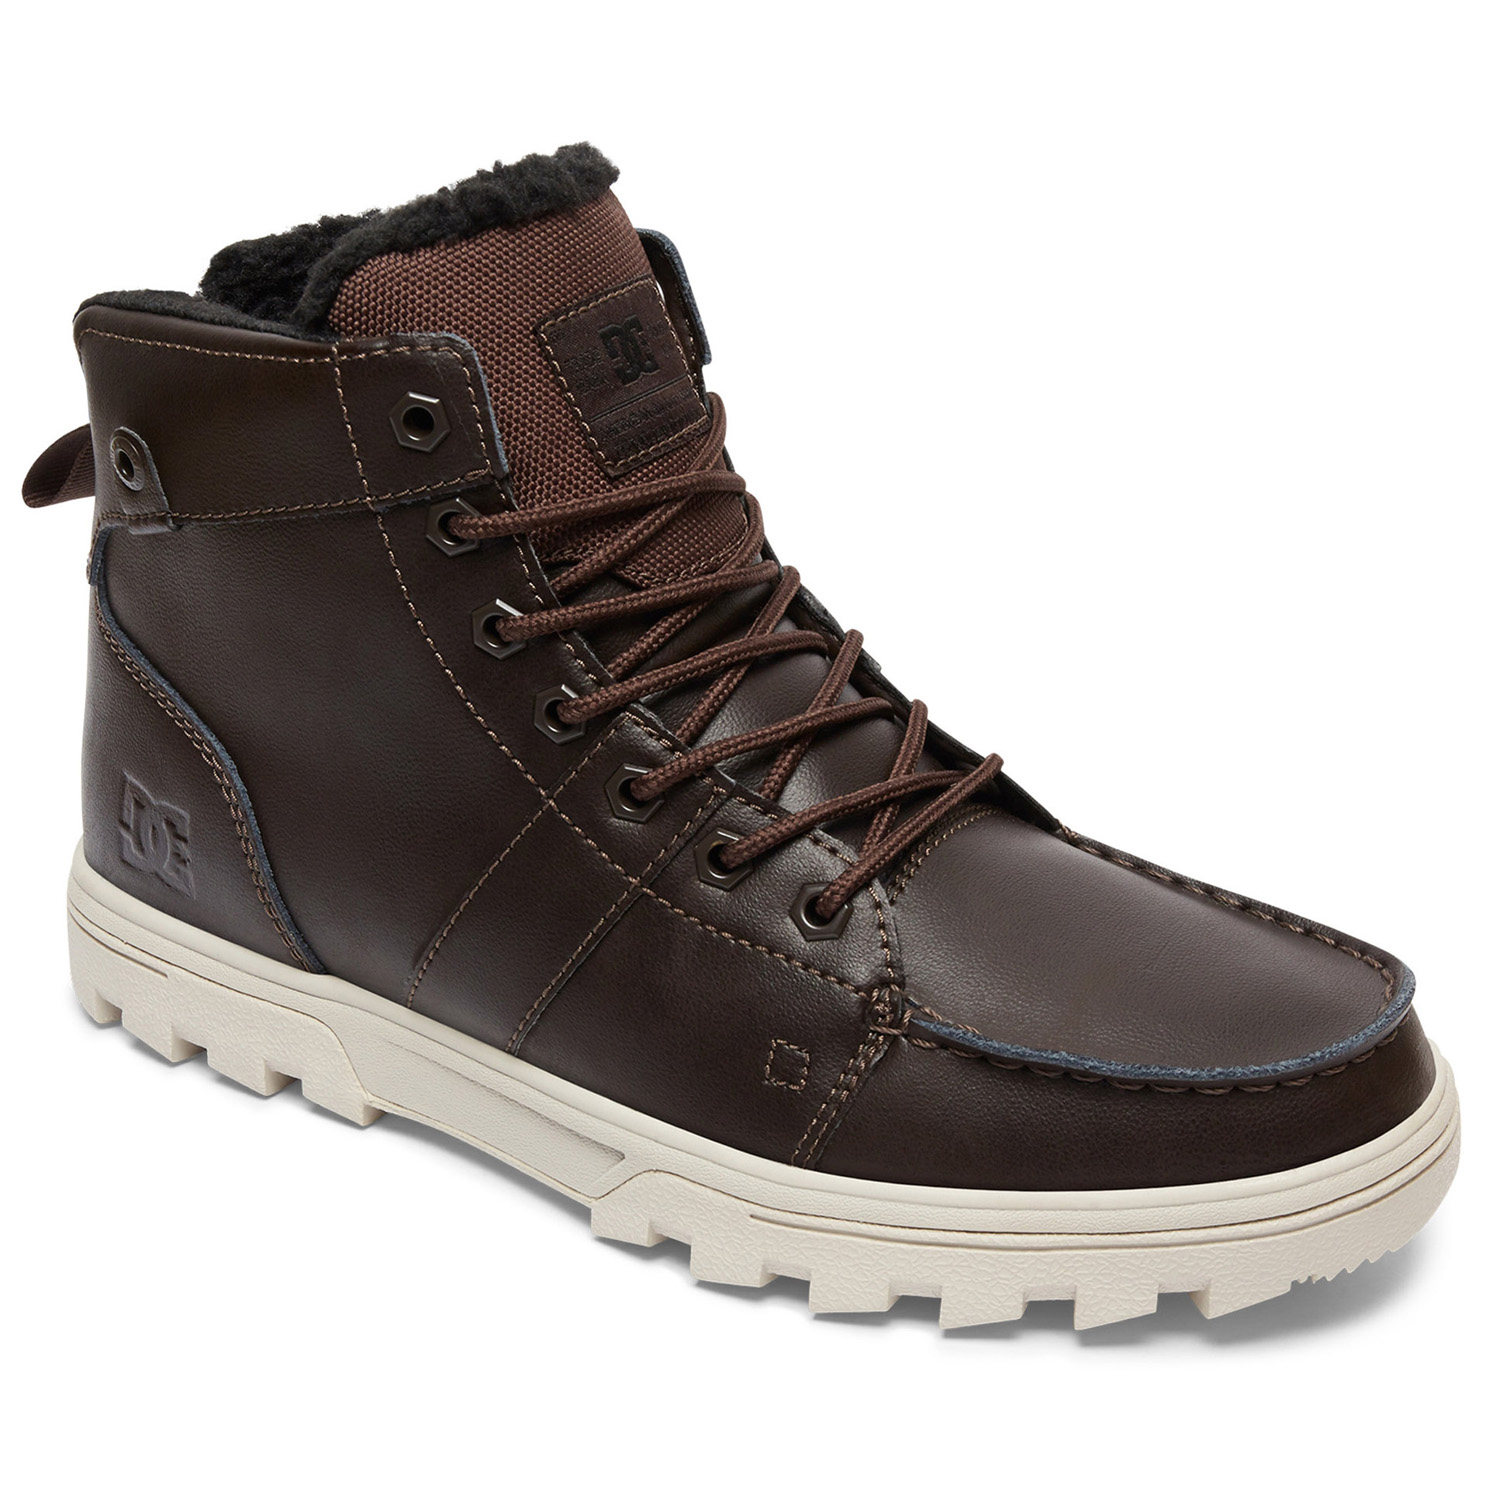 DC Winter Shoes Woodland Brown/Tan